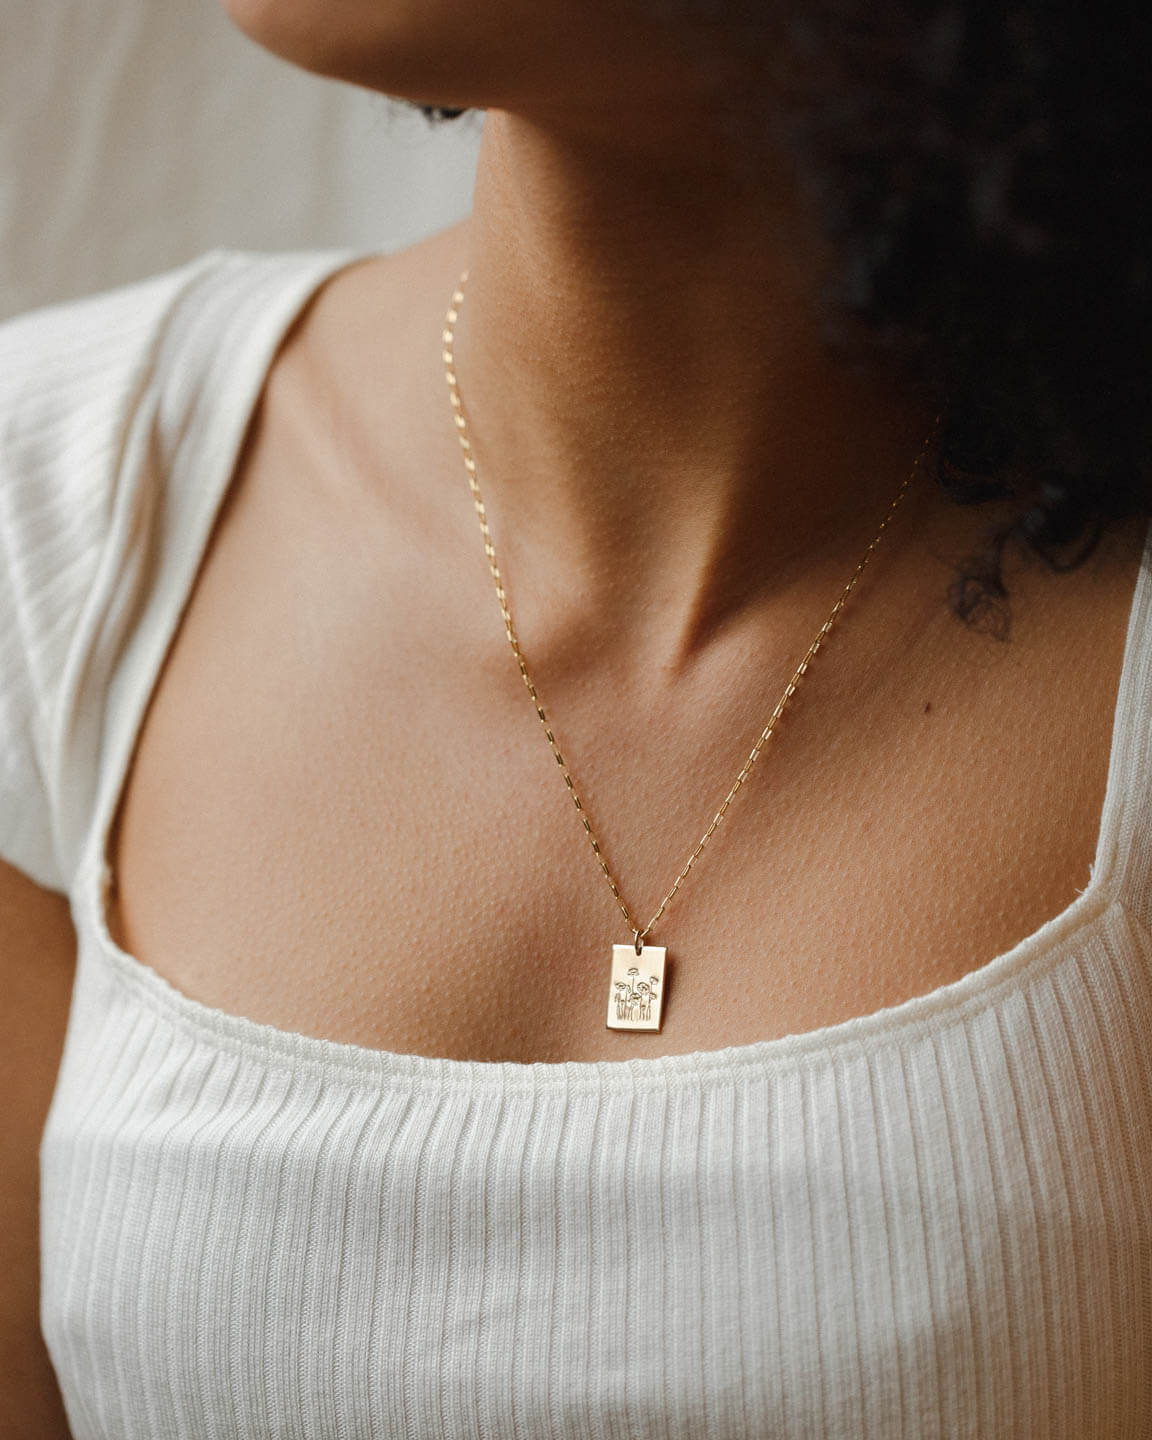 GLDN Flower Personalized Necklace. 14K Gold Fill / Gardenia